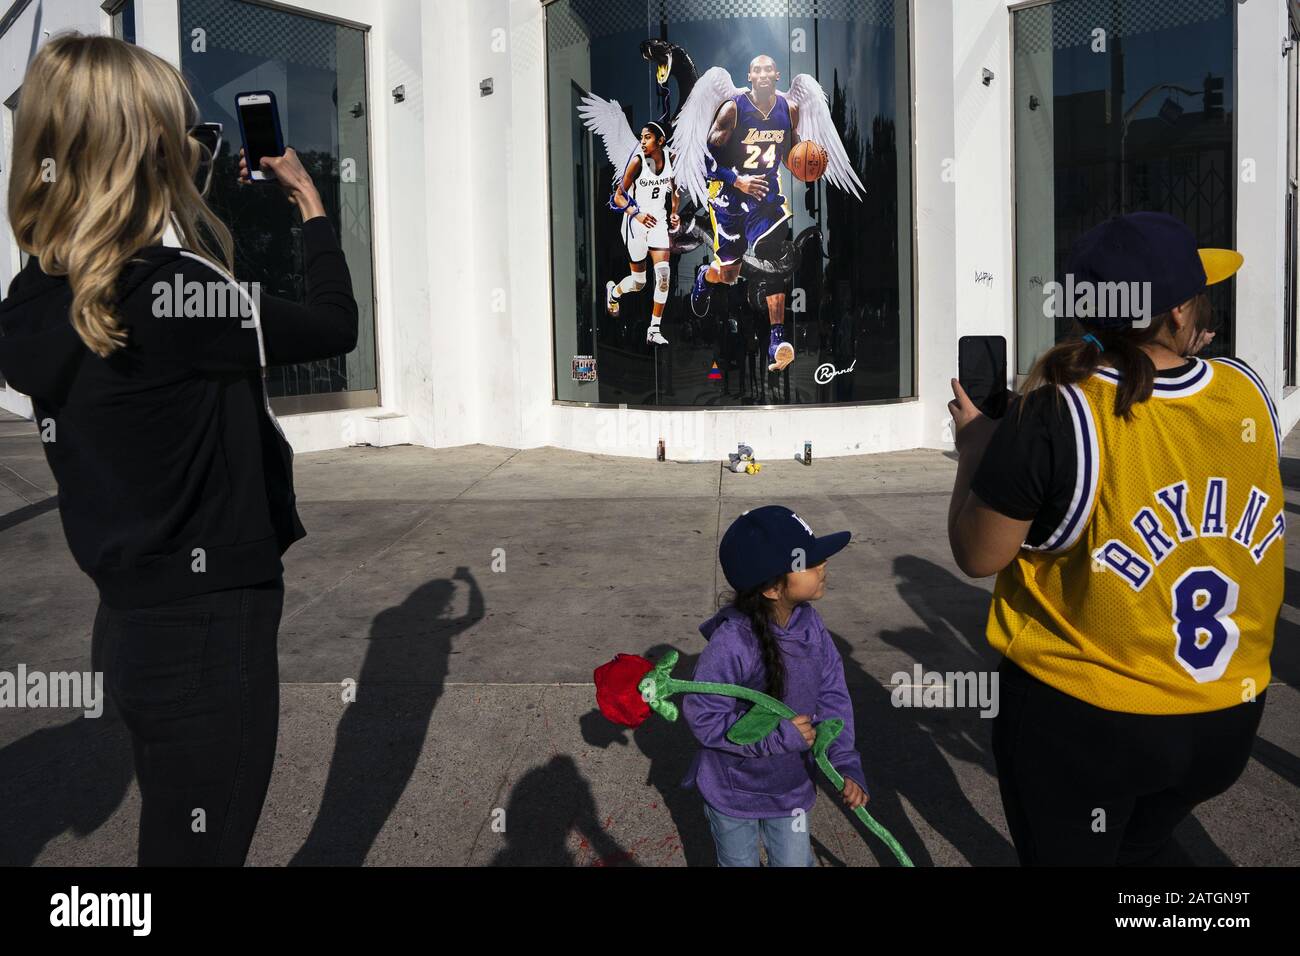 Los Angeles, USA. 15th Mar, 2019. Kobe Bryant fans take pictures of an illustration of Bryant and his daughter during a makeshift memorial in honour of the former NBA star, Kobe Bryant, outside the Staples Center in Los Angeles.Kobe and his daughter Gianna were among the nine people who died in a helicopter crash. Credit: Ronen Tivony/SOPA Images/ZUMA Wire/Alamy Live News Stock Photo